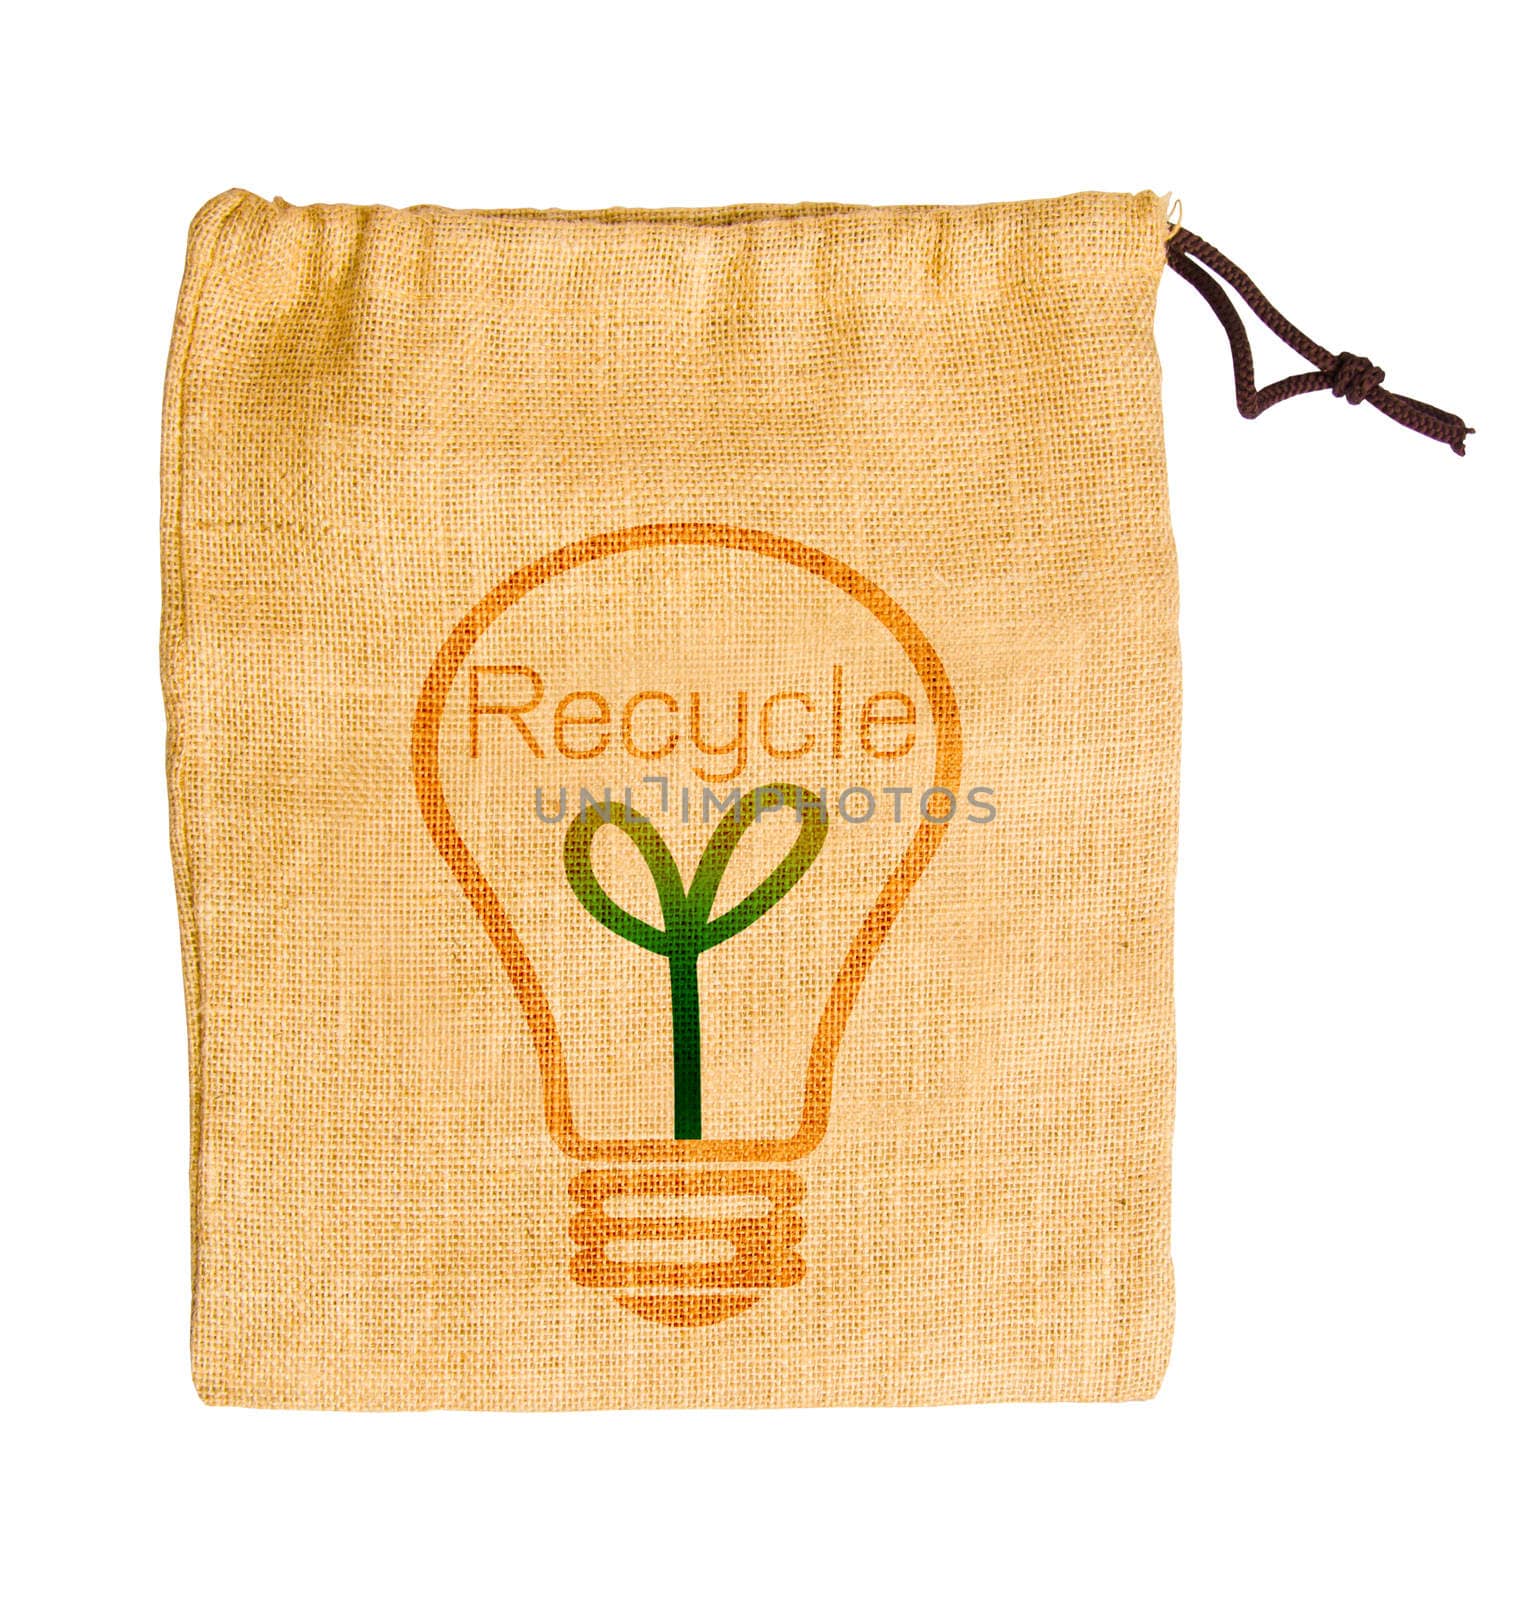 Empty sack bag with recycle concept. Isolated on white background, clipping path